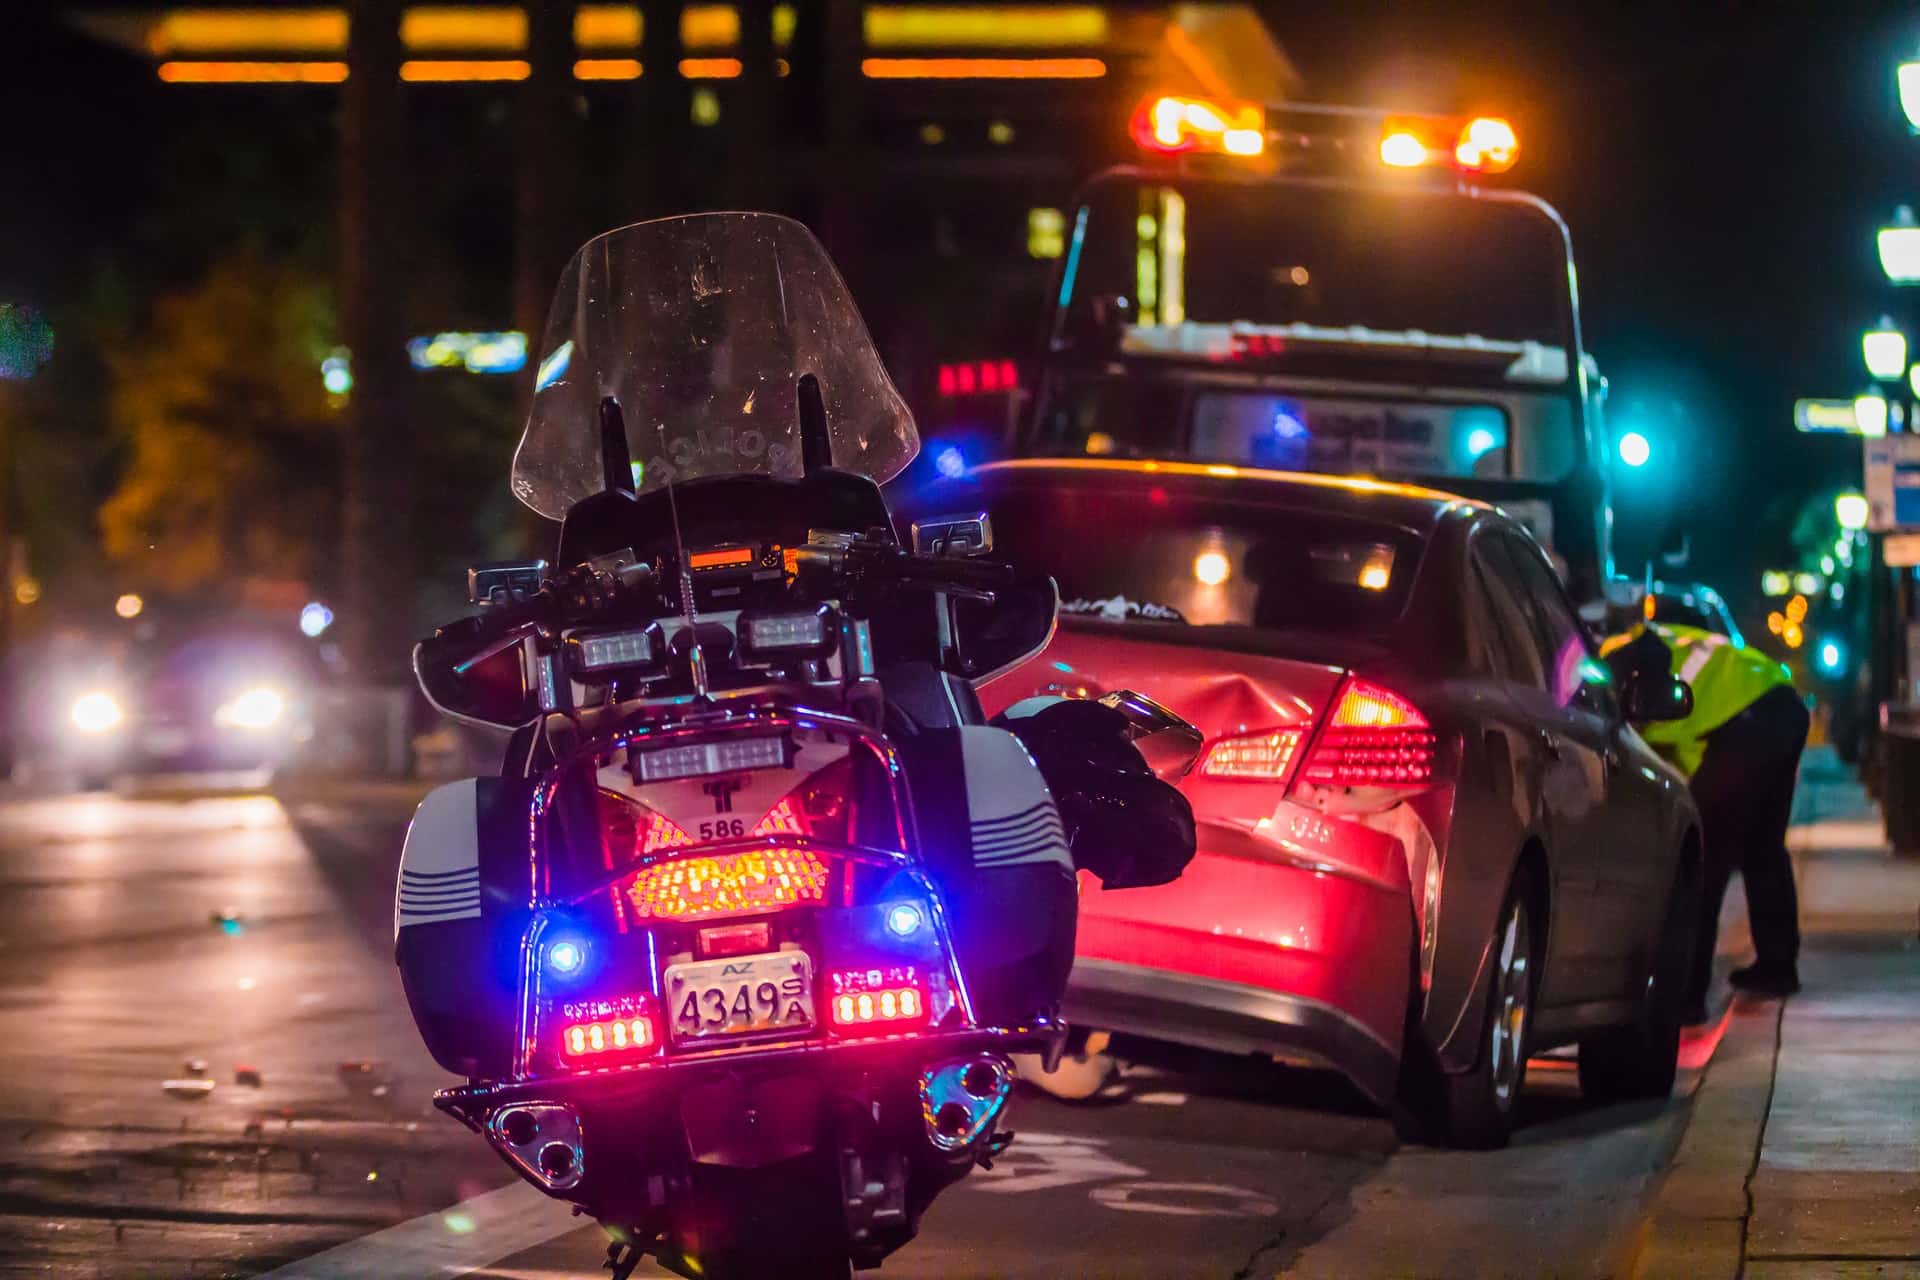 A police motorcycle at the scene of a car accident